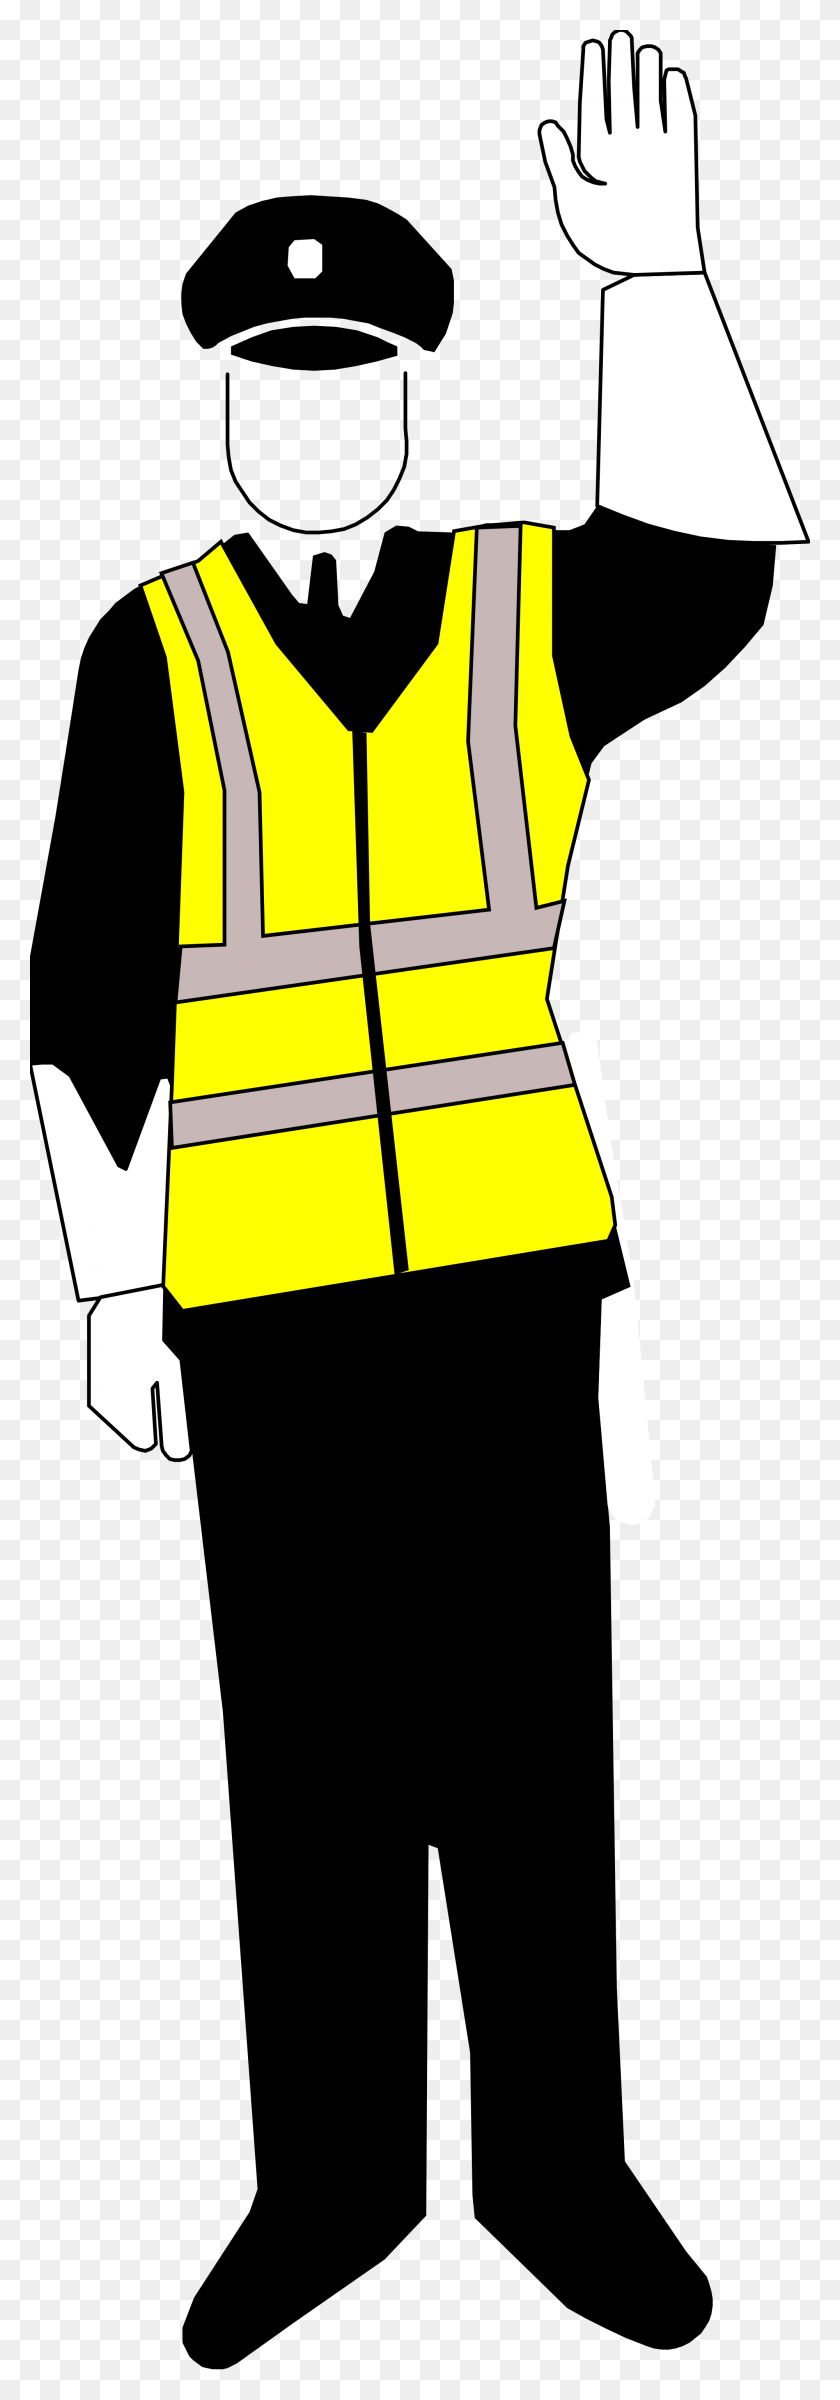 2000x6000 Police Stop Yellow - Police Uniform Clipart